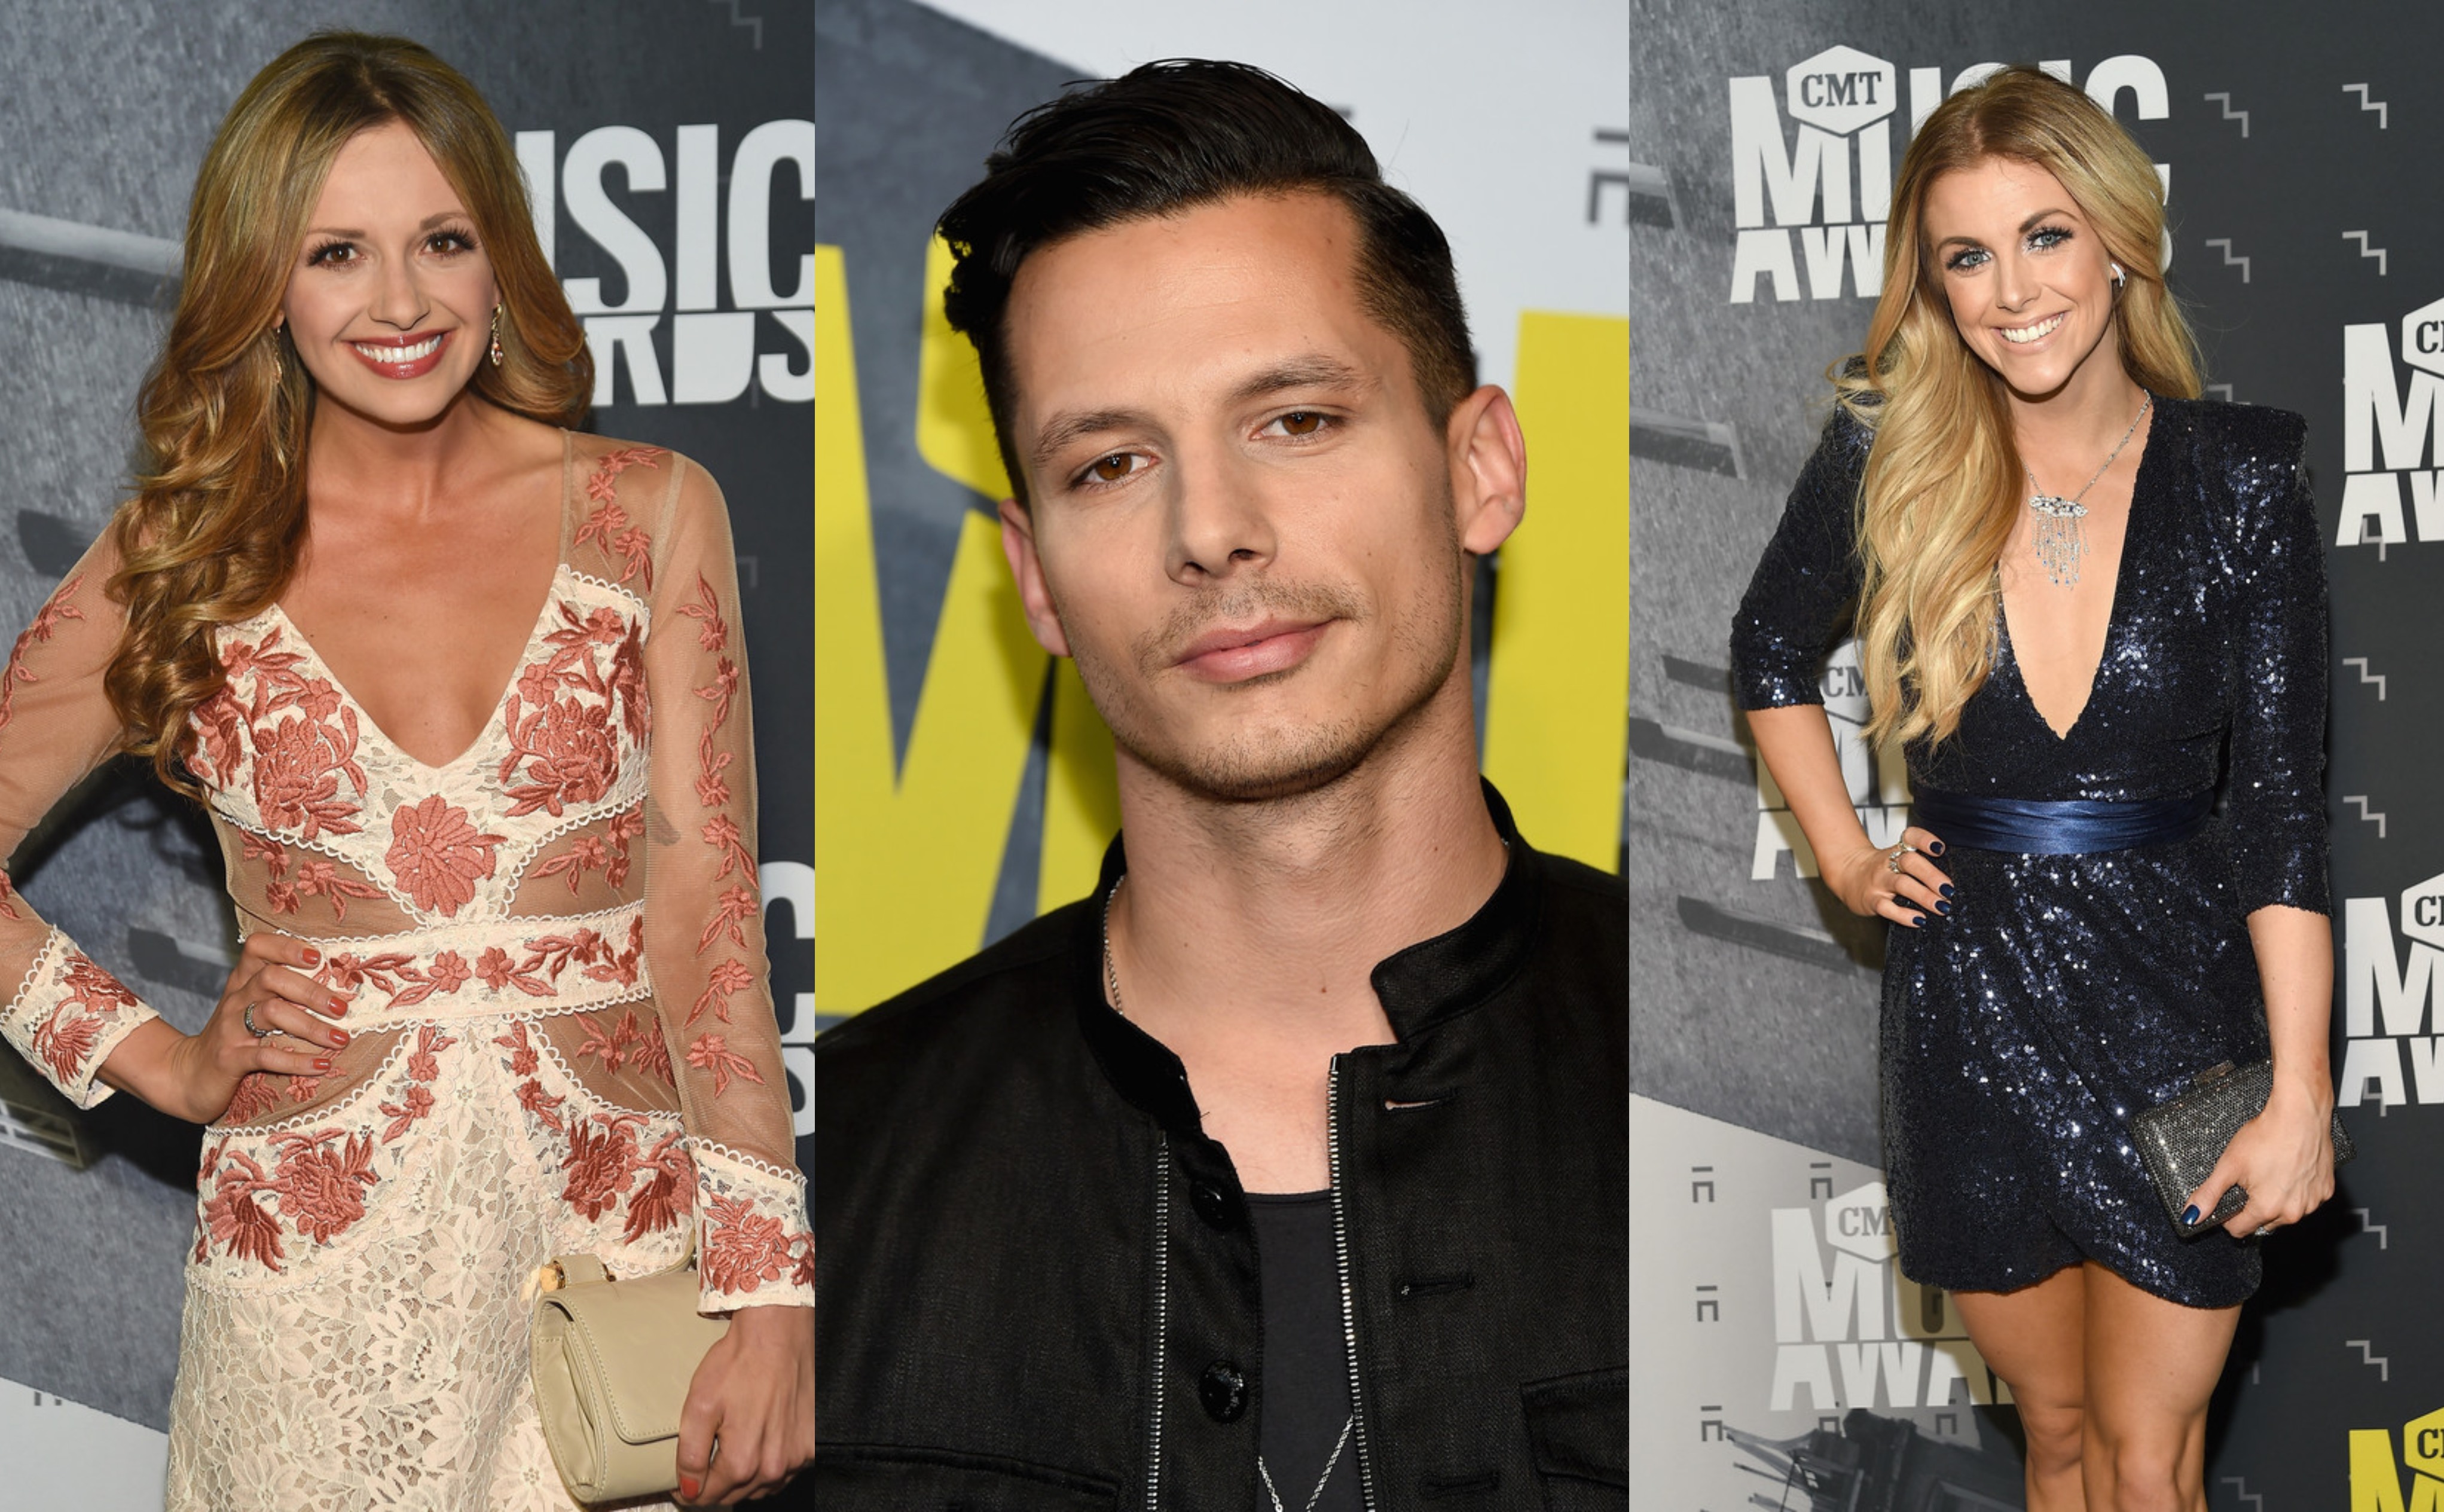 Carly Pearce, Devin Dawson, LANCO and Lindsay Ell Added to Perform at 2018 CMT Music Awards